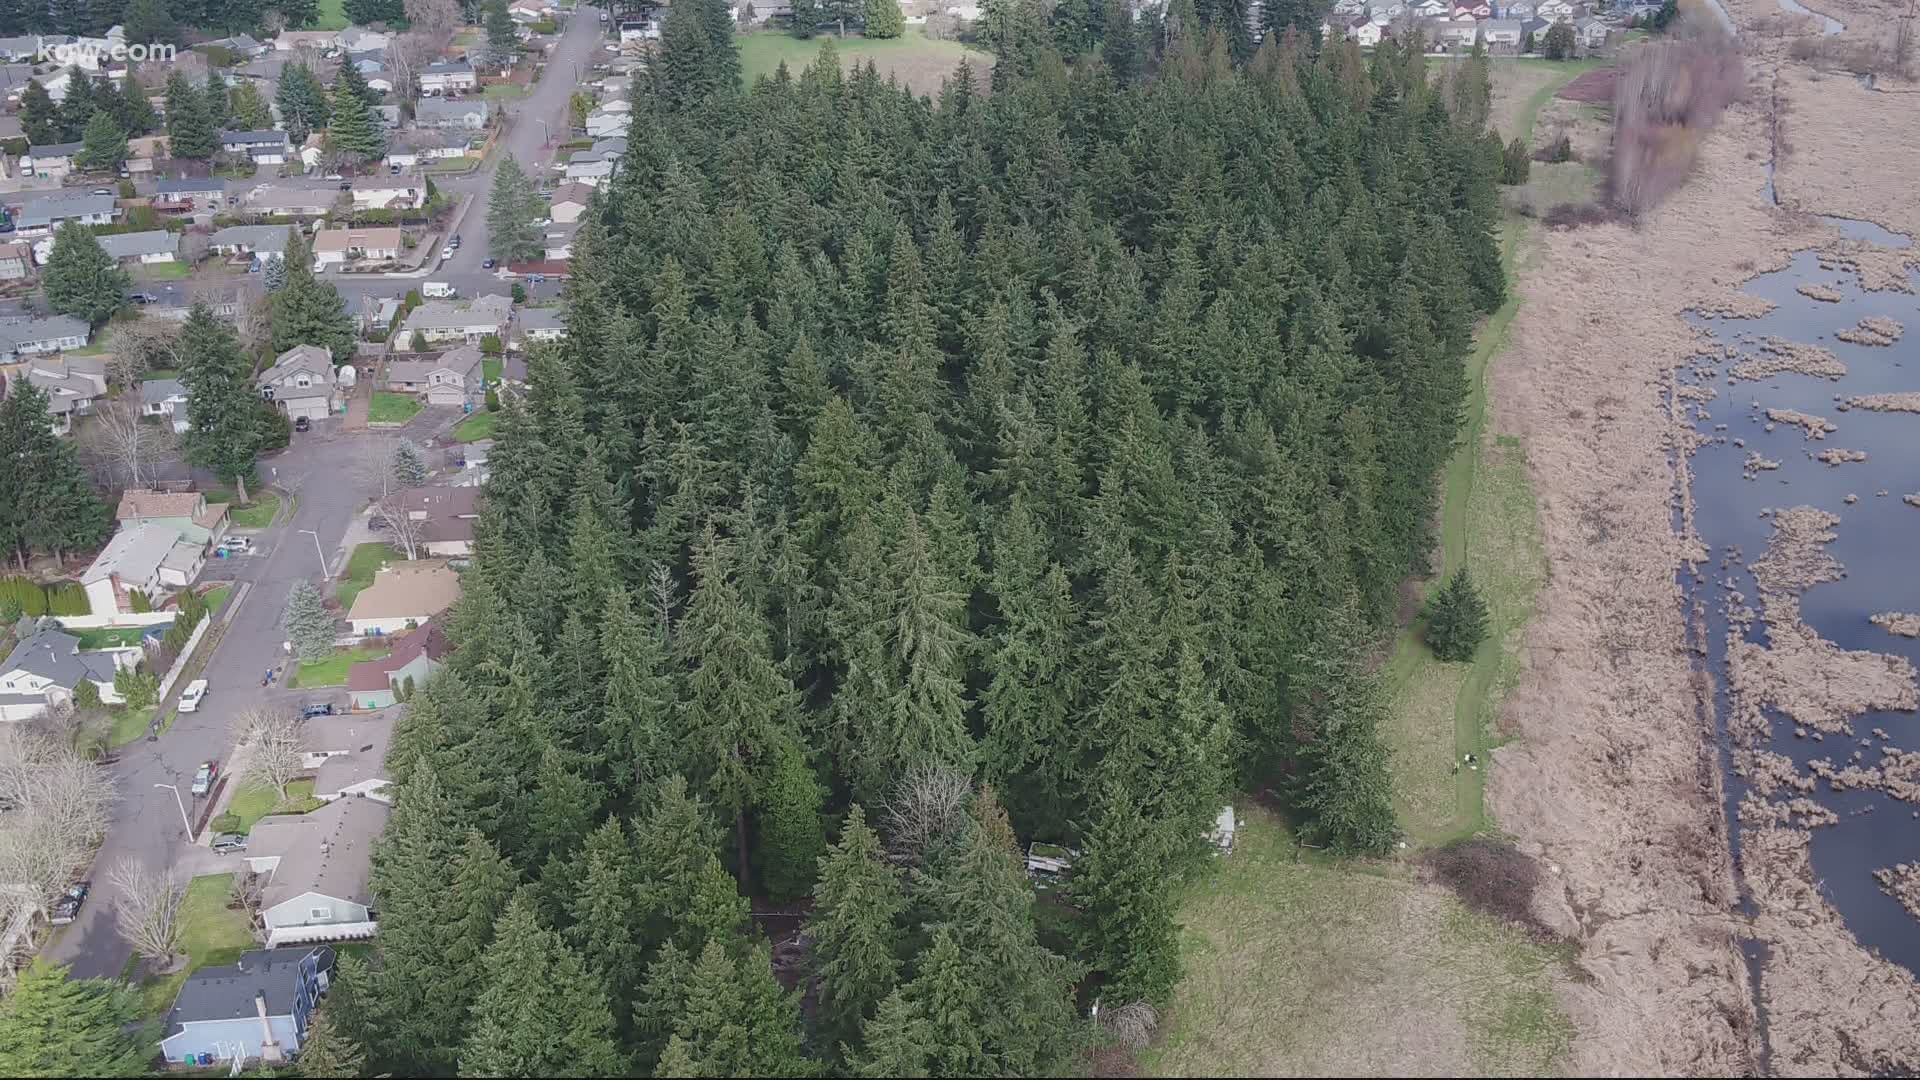 Gresham neighbors are fighting to save more than 260 Douglas Fir trees and a key animal habitat. Keely Chalmers has a birds-eye view of the controversy.